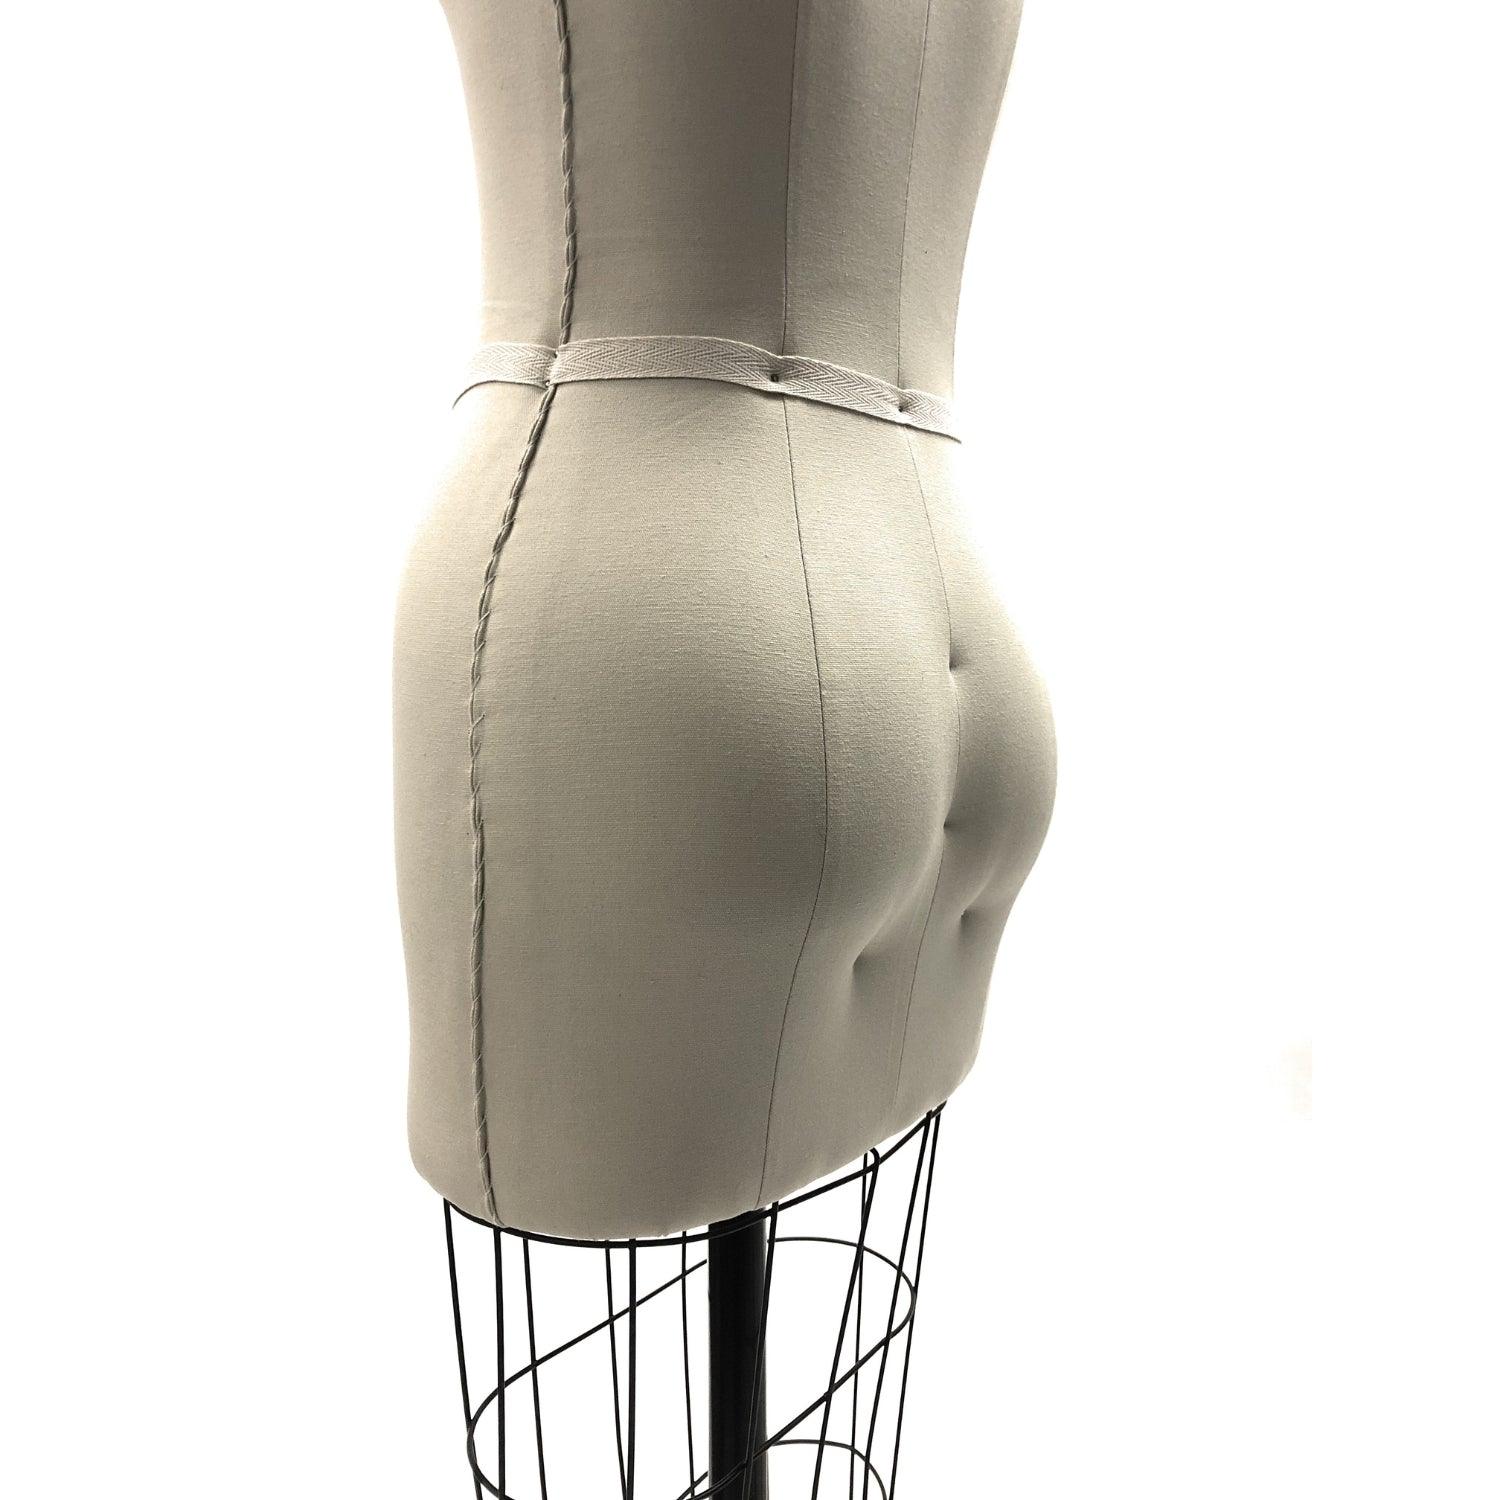 Professional Female Dress Form w/ Removable Magnetic Shoulders